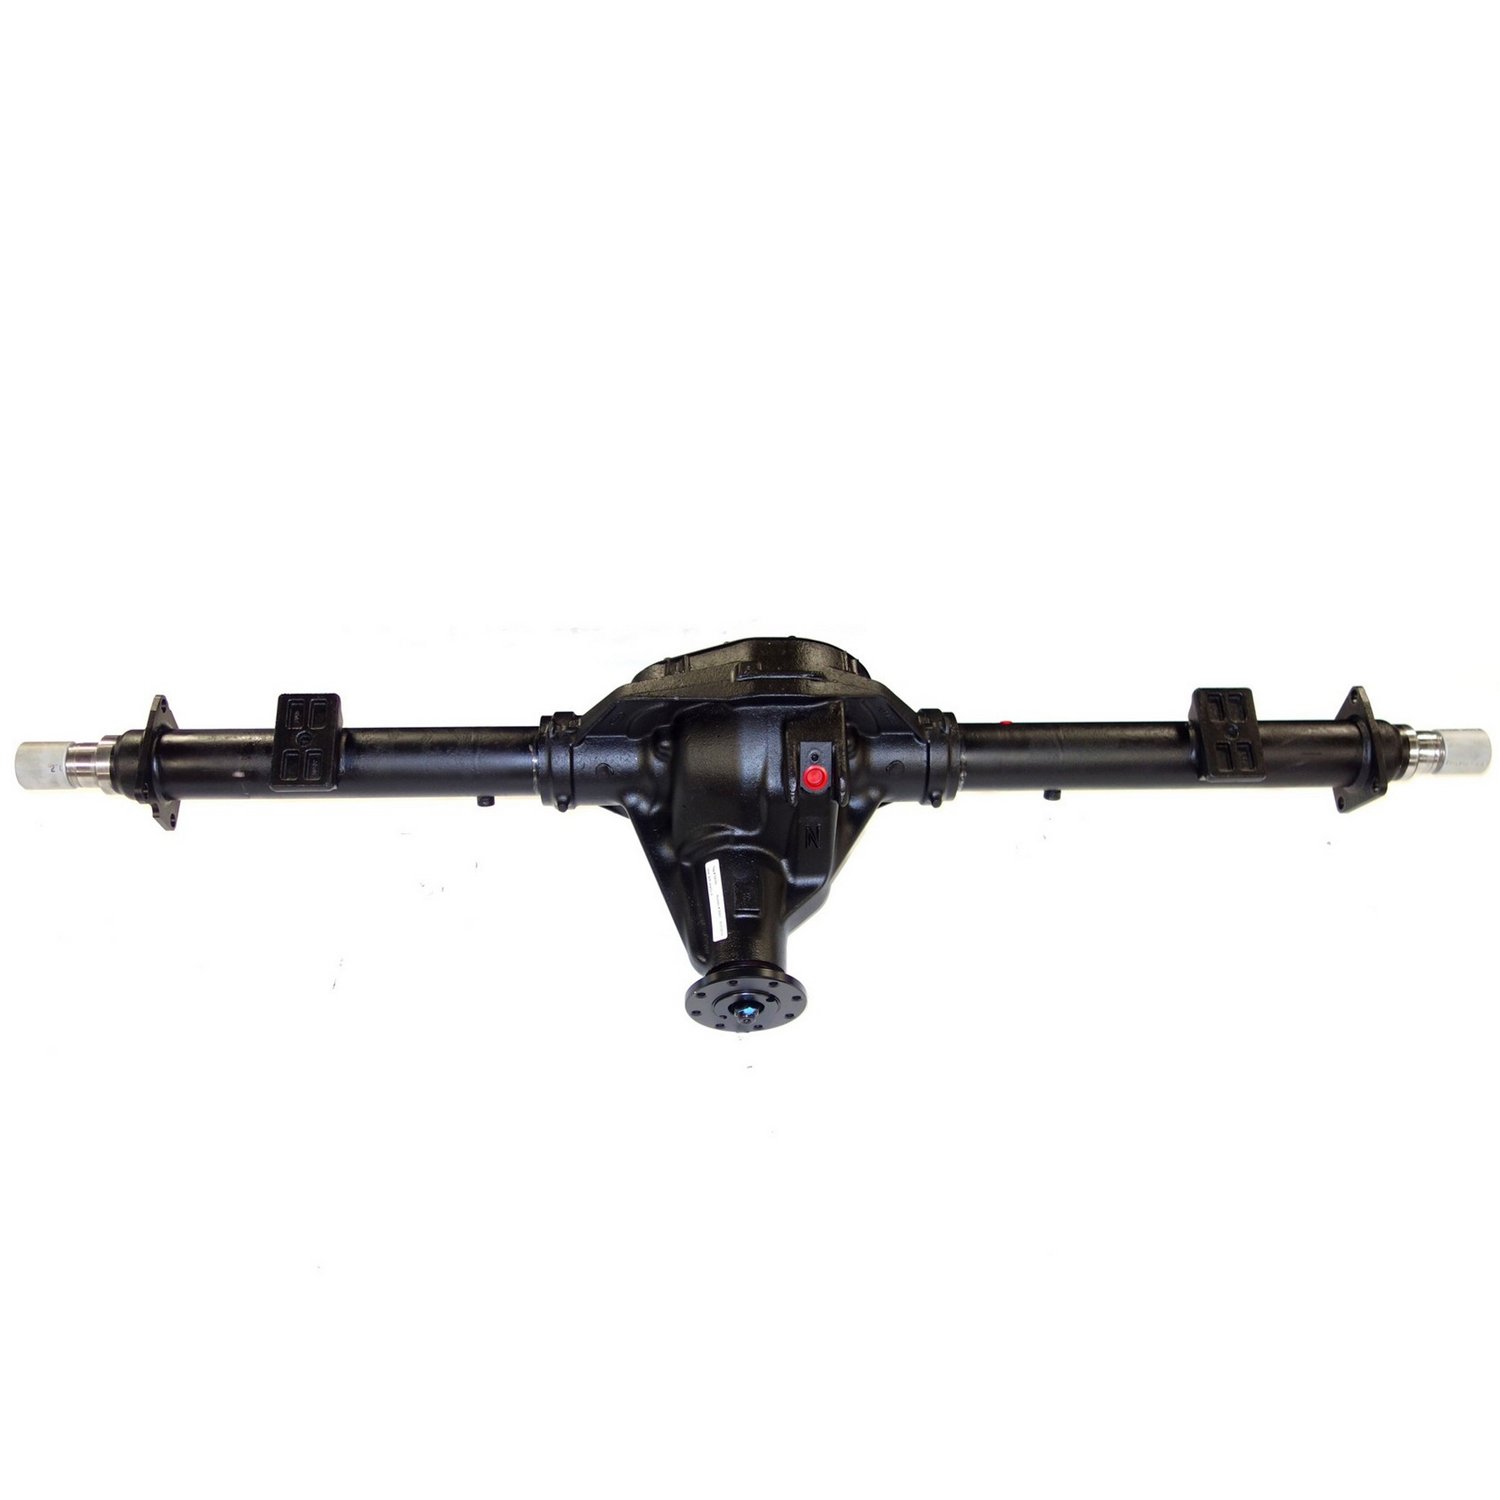 Remanufactured Axle Assy for 10.25" 87-97 F250 & F350 4.11 , ABS, SRW, Ff, Posi LSD